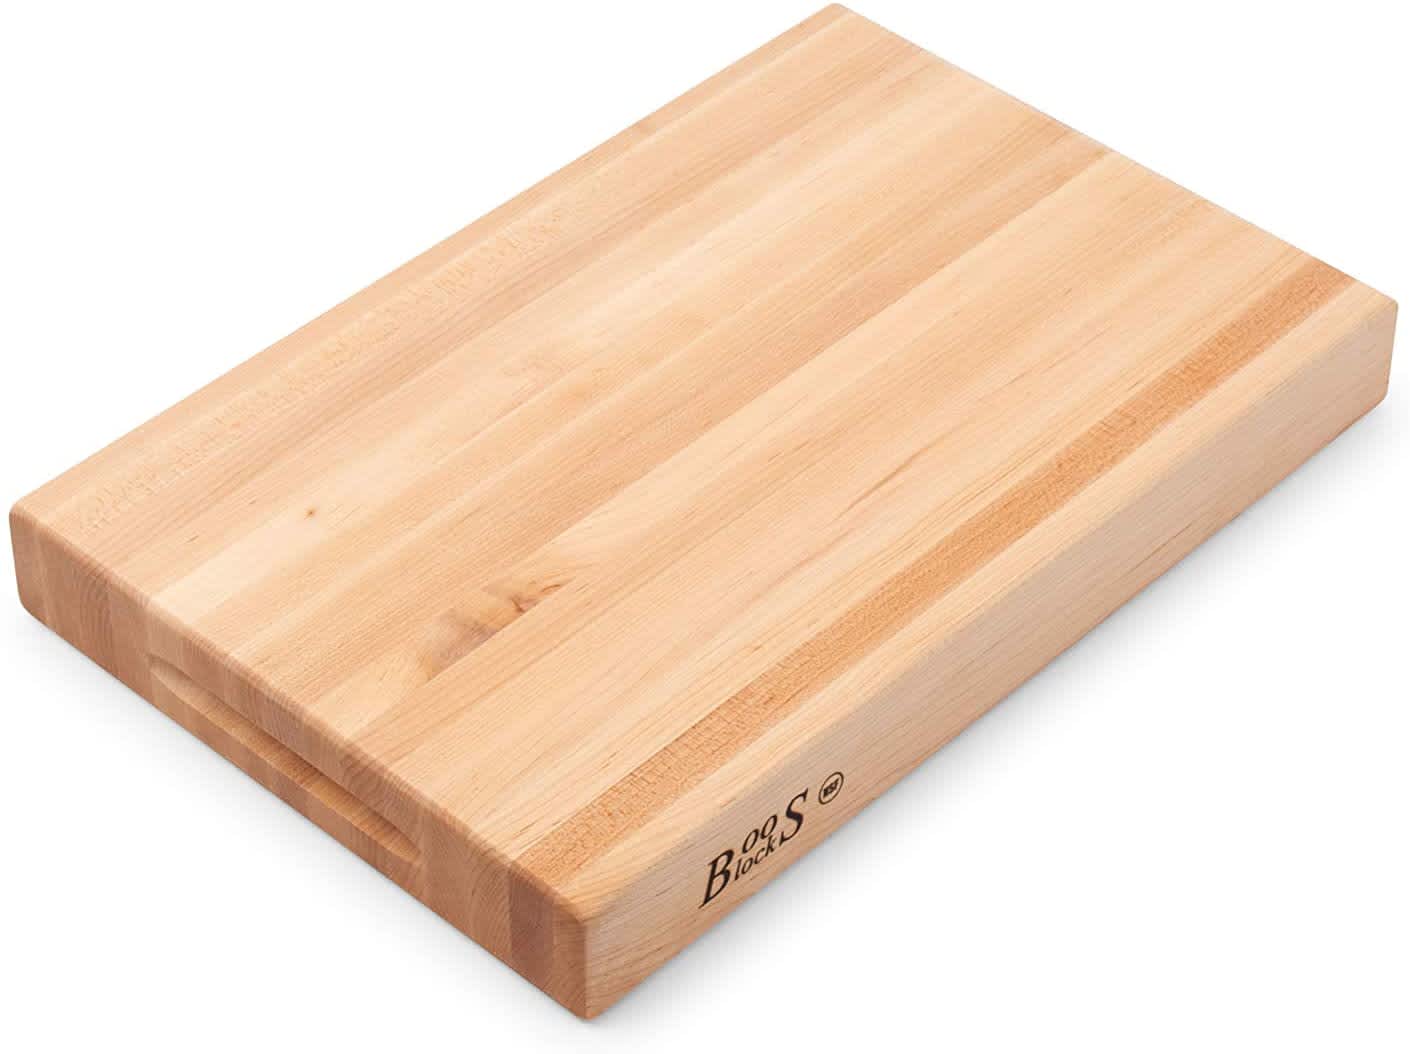 What is the Healthiest Cutting Board Material? Our Top 3 List